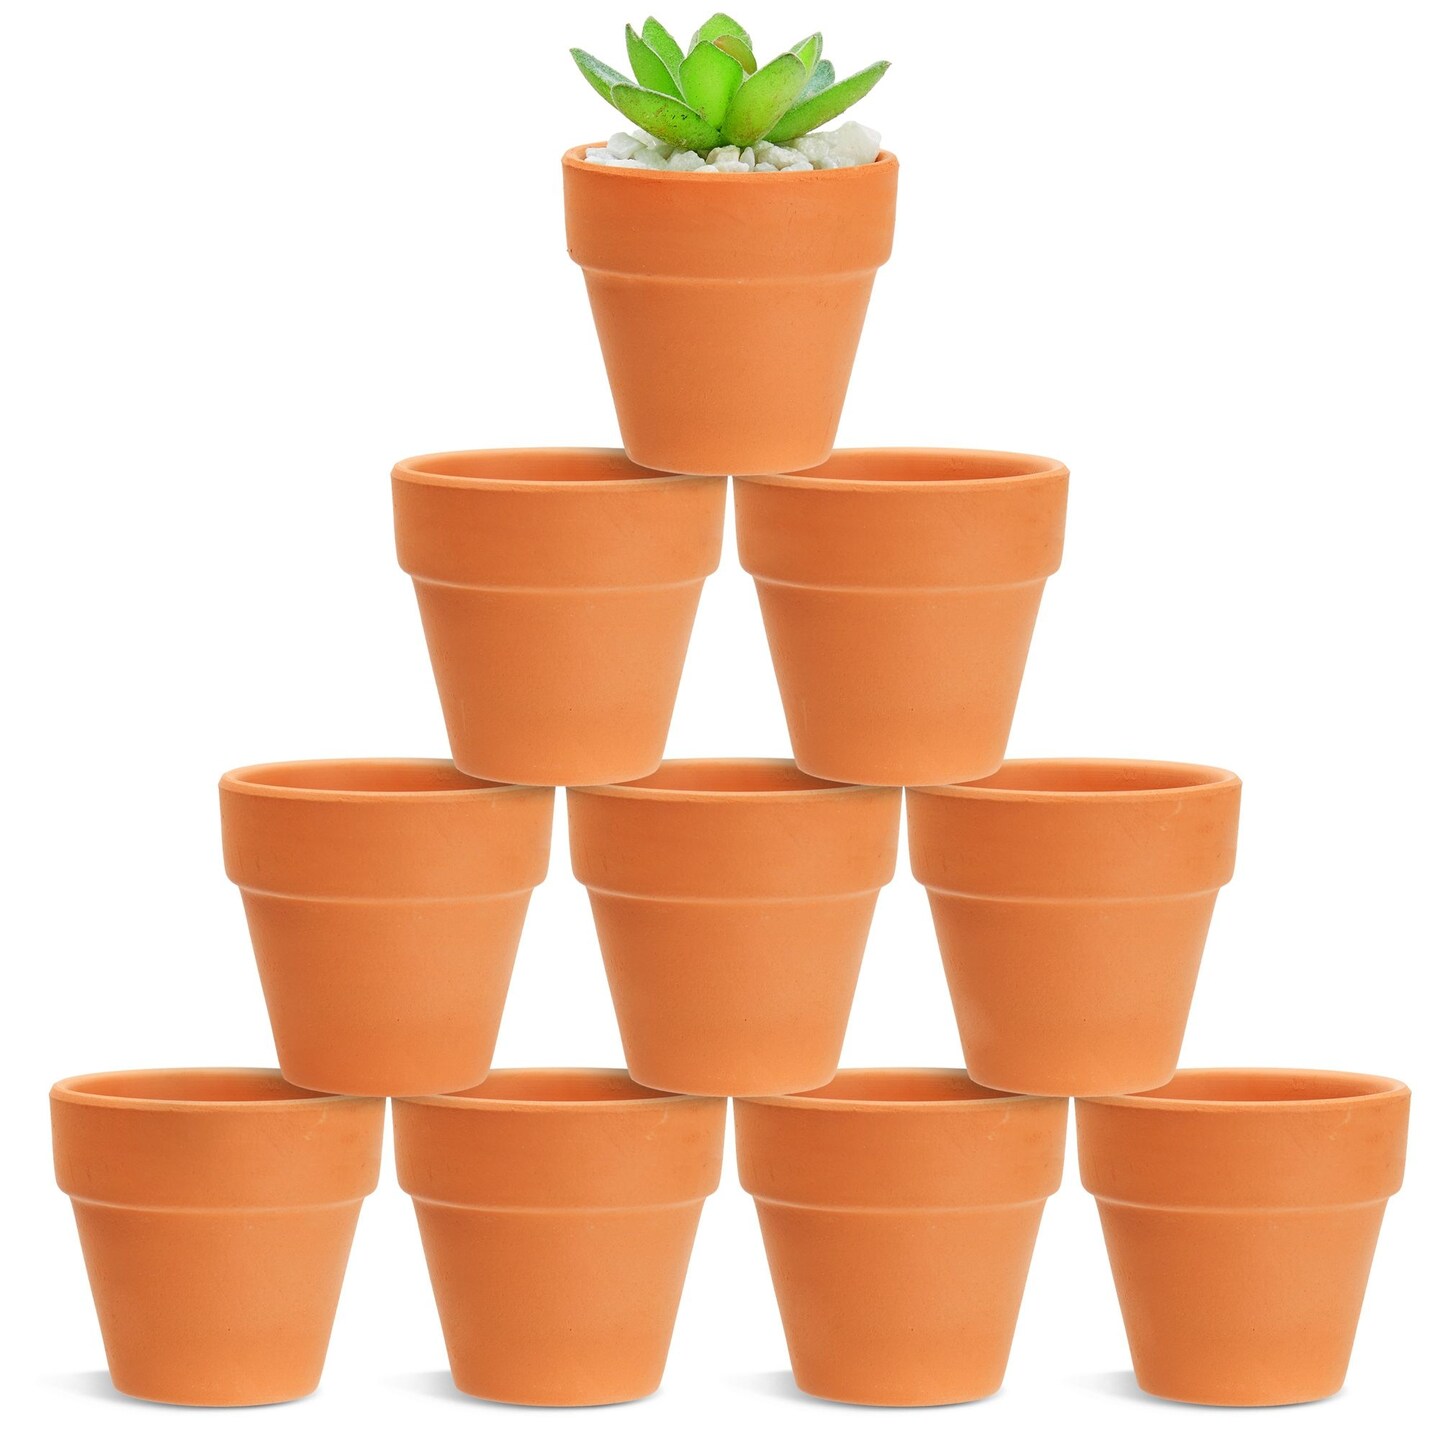 10 Pack 2.5 inch Mini Terra Cotta Pots with Drainage Holes, Small Clay Flower Pots for Plants, Succulents